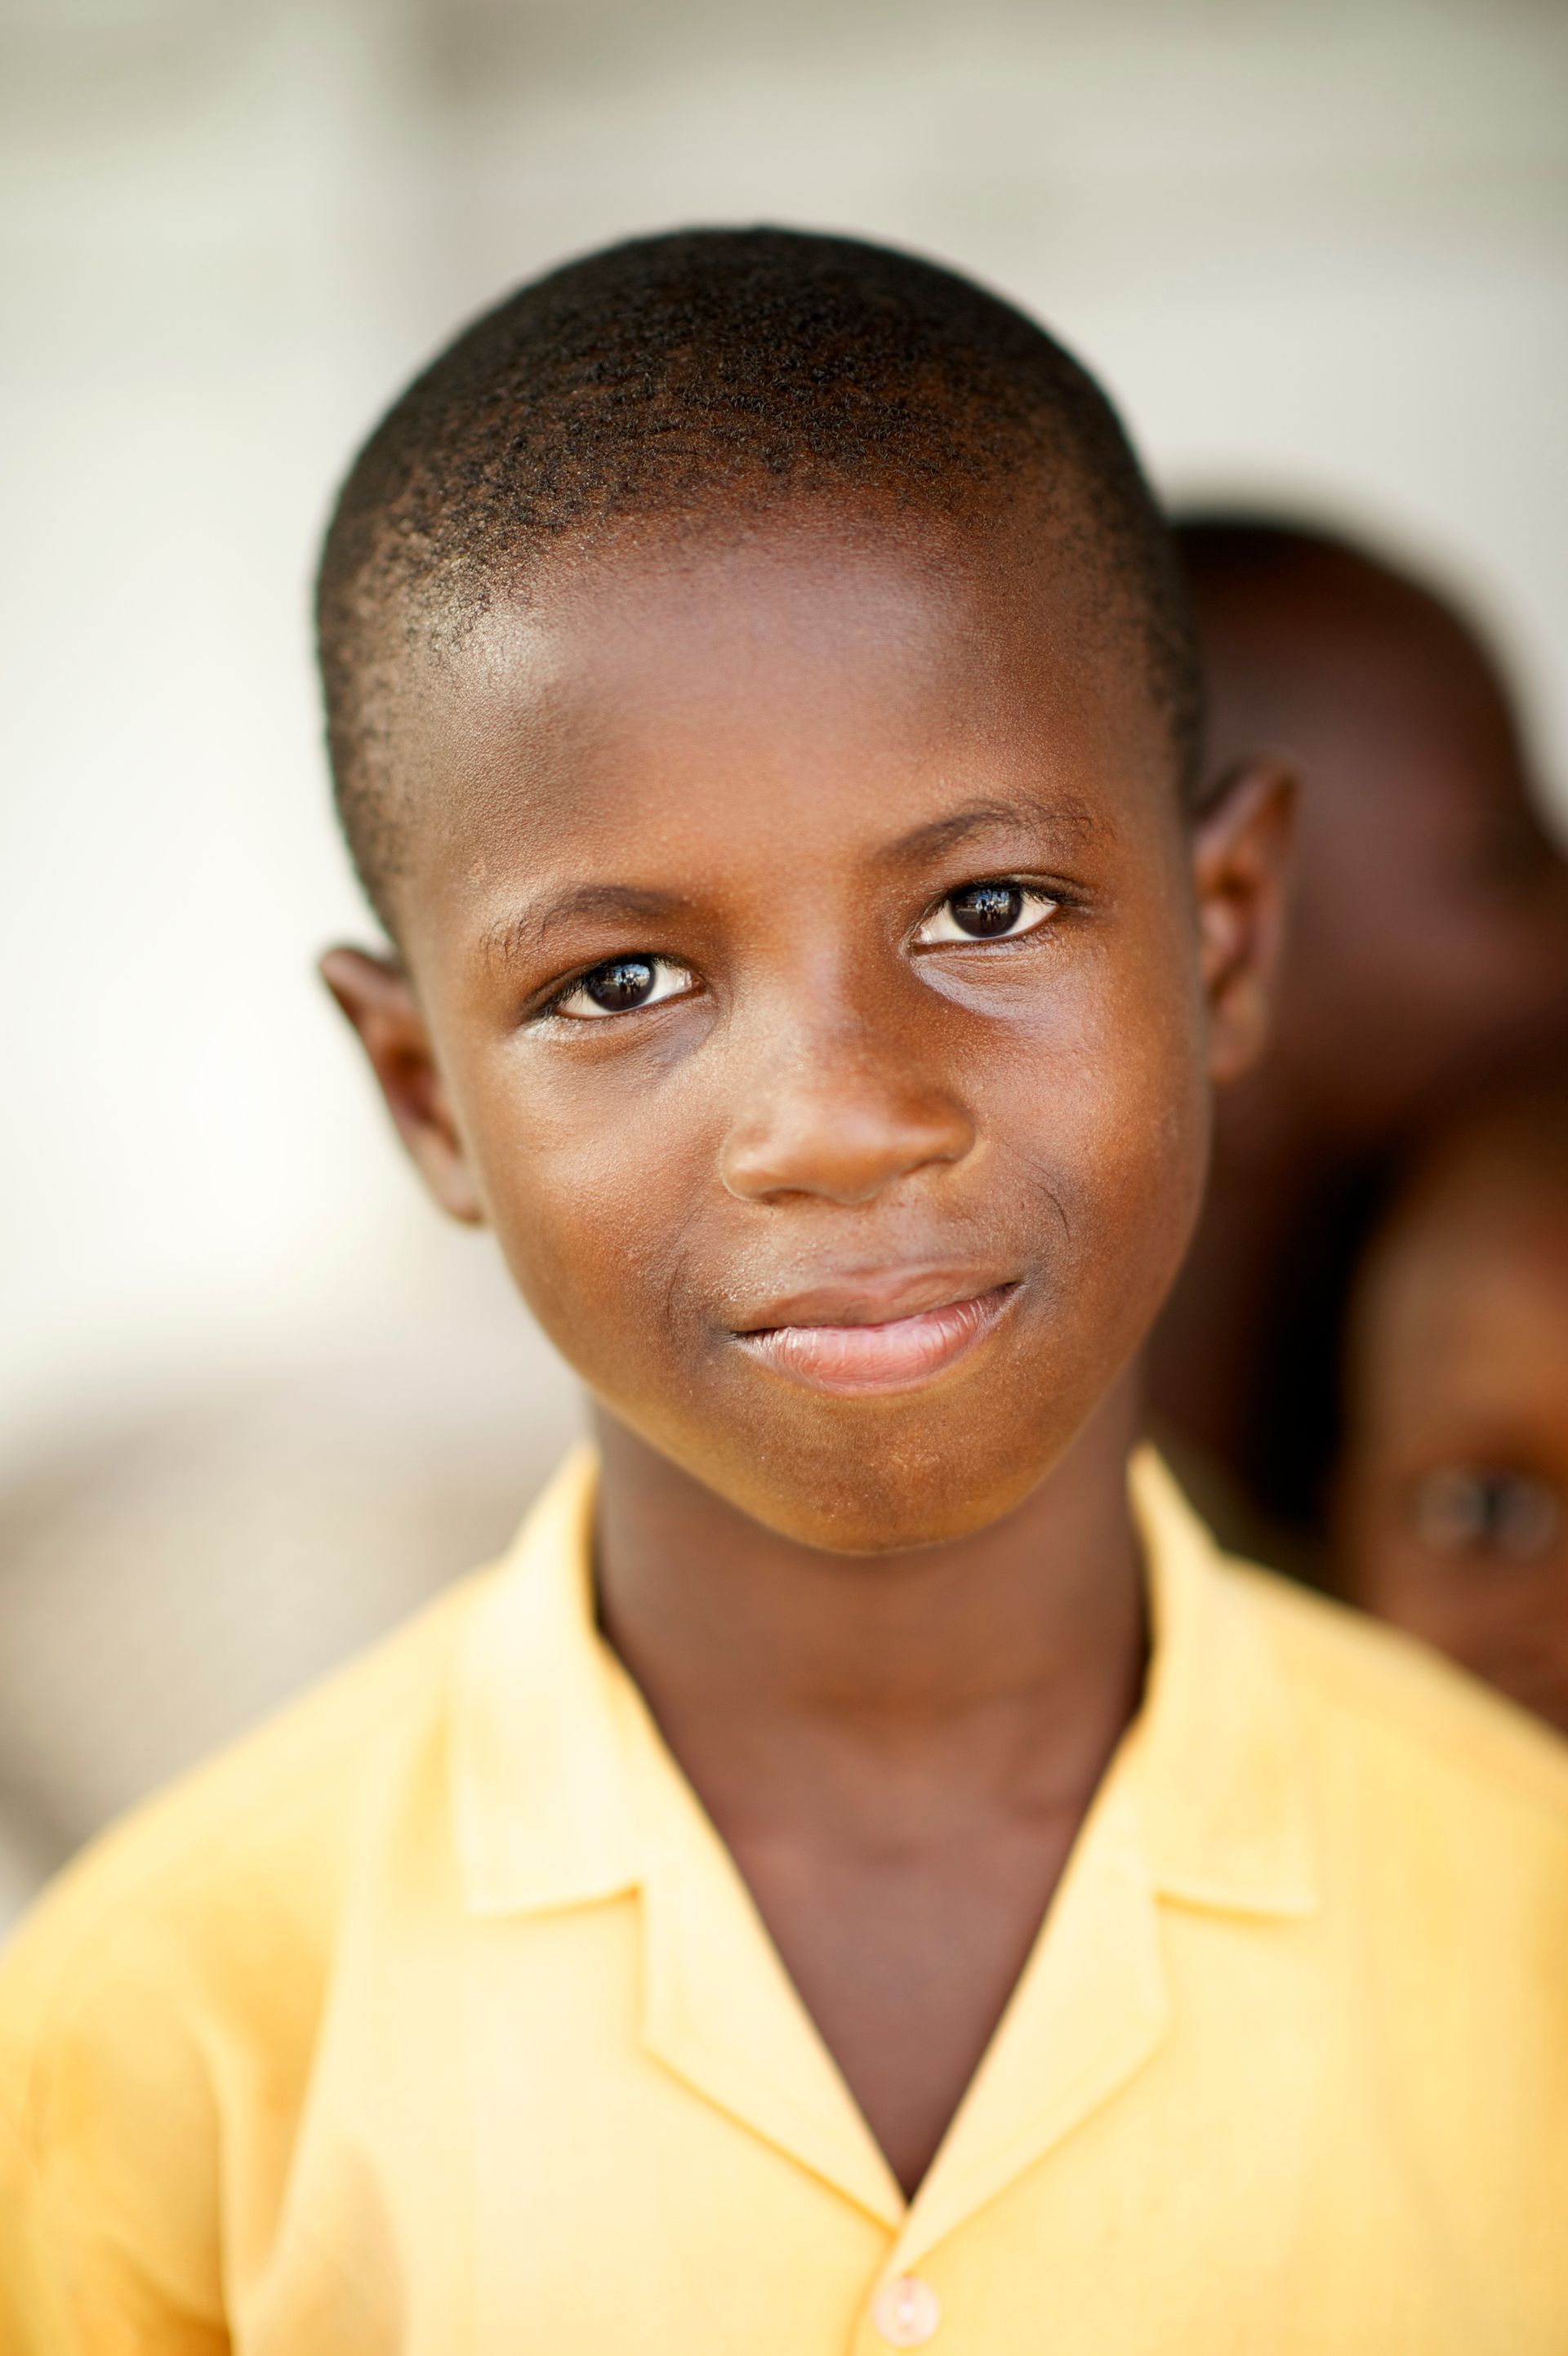 A young boy in Ghana.  